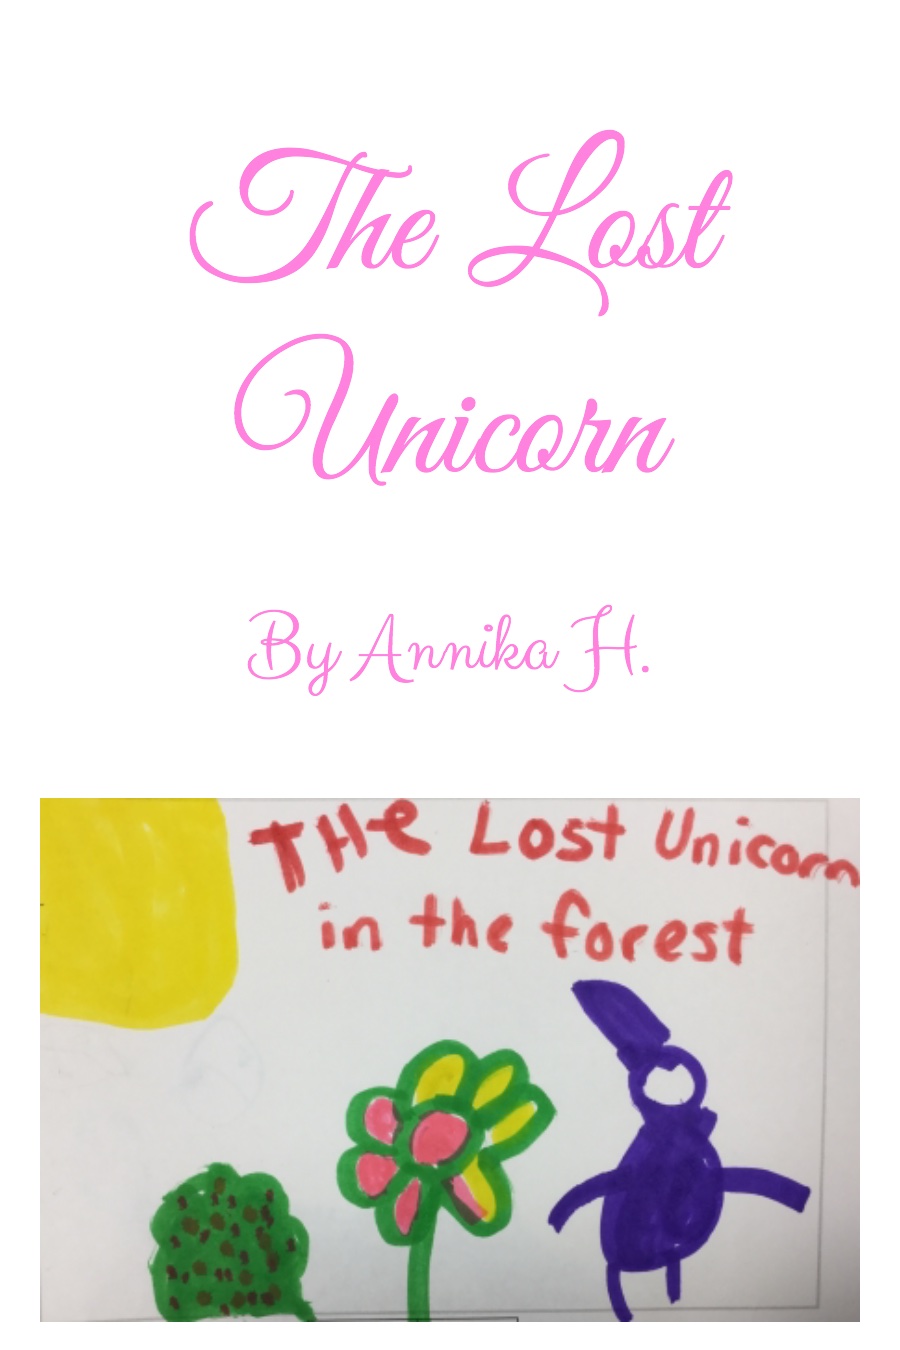 The Lost Unicorn by Annika H